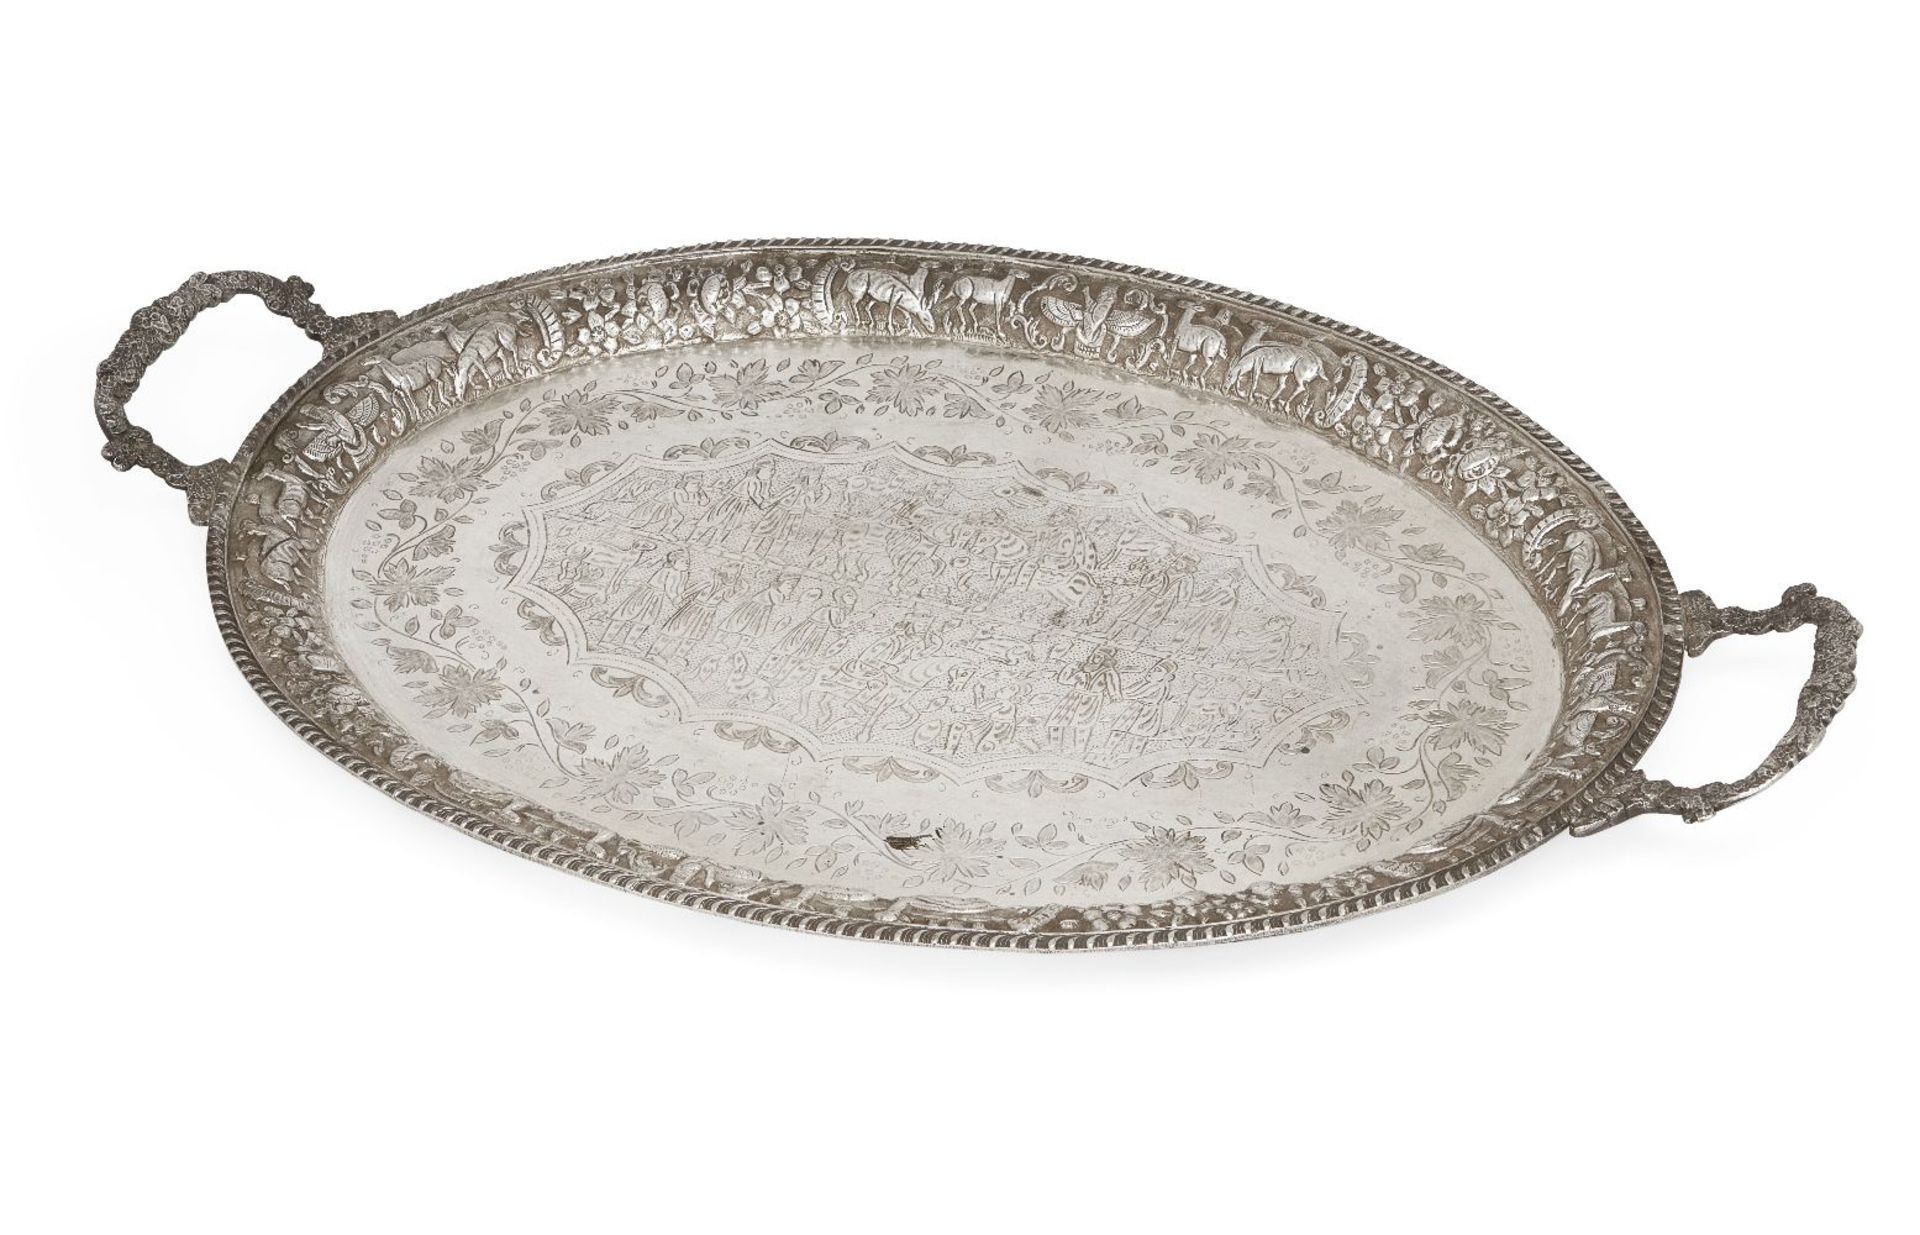 An early 20th century Persian tray, with marks for Persian silver, the oval-shaped sides designed